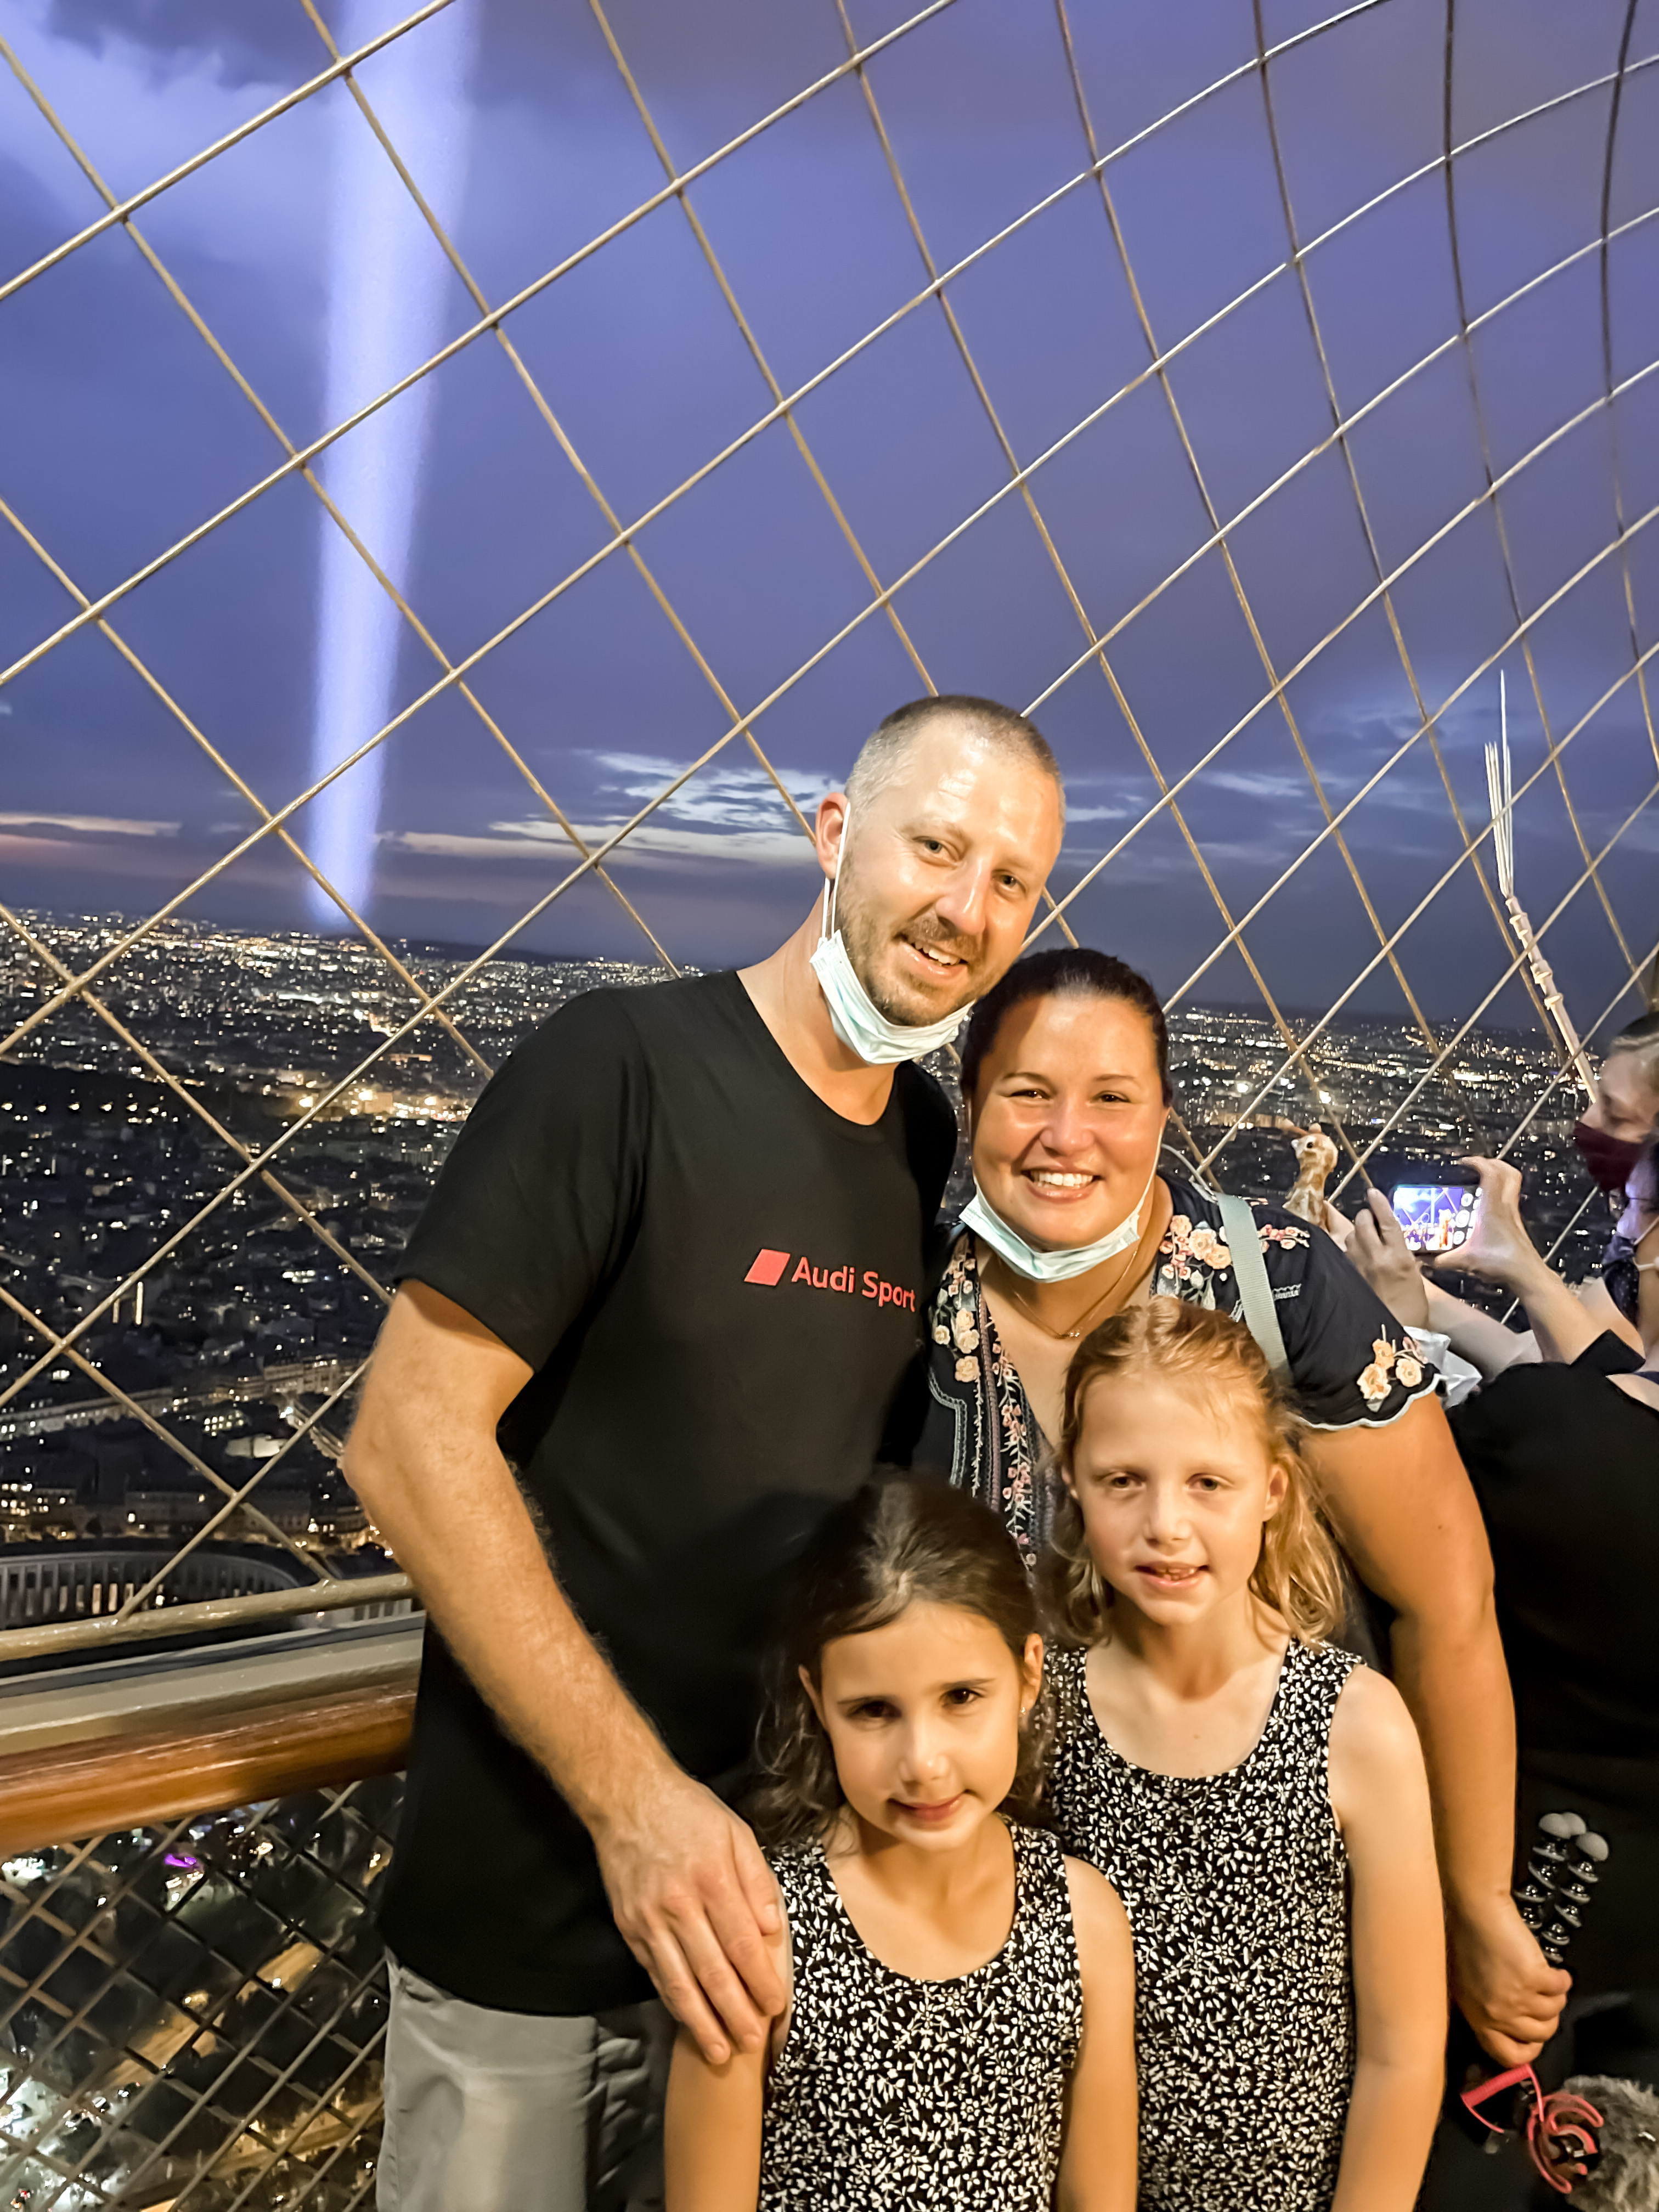 Top of the Eiffel Tower - One Weekend in Paris with kids